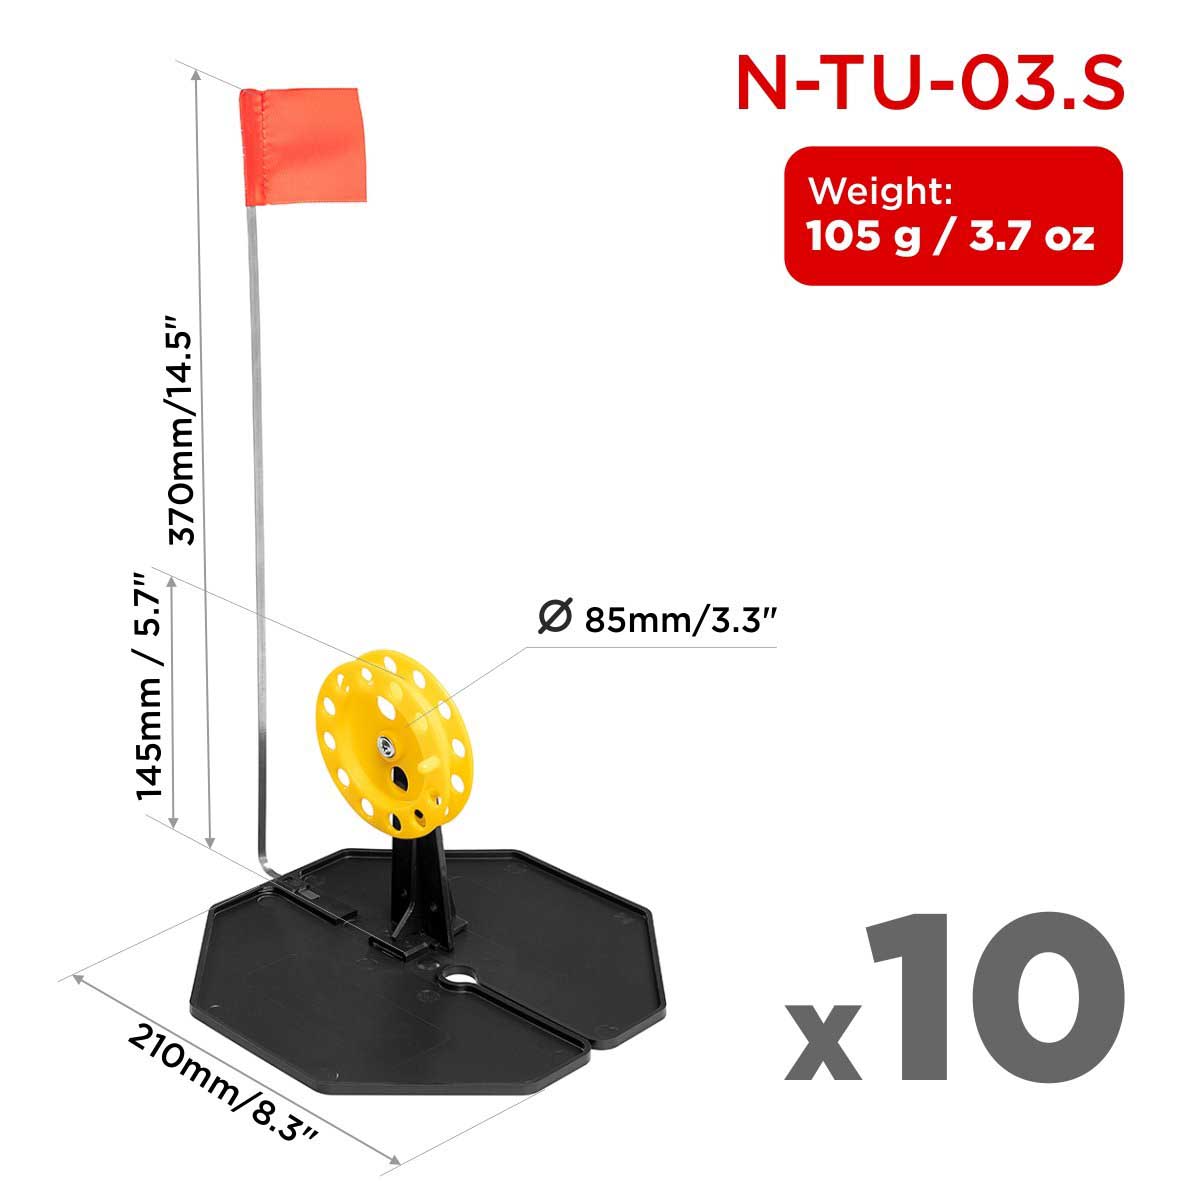 Set of Tip-up Pop-Up Integrated Hole-Cover Easy to Clip N-Tu-03. Each weighs 3.7 oz, the base is 8.3 inches long, the flag shaft is 14.5 inches, the spool diameter is 3.3 inches and its height is 5.7 inches